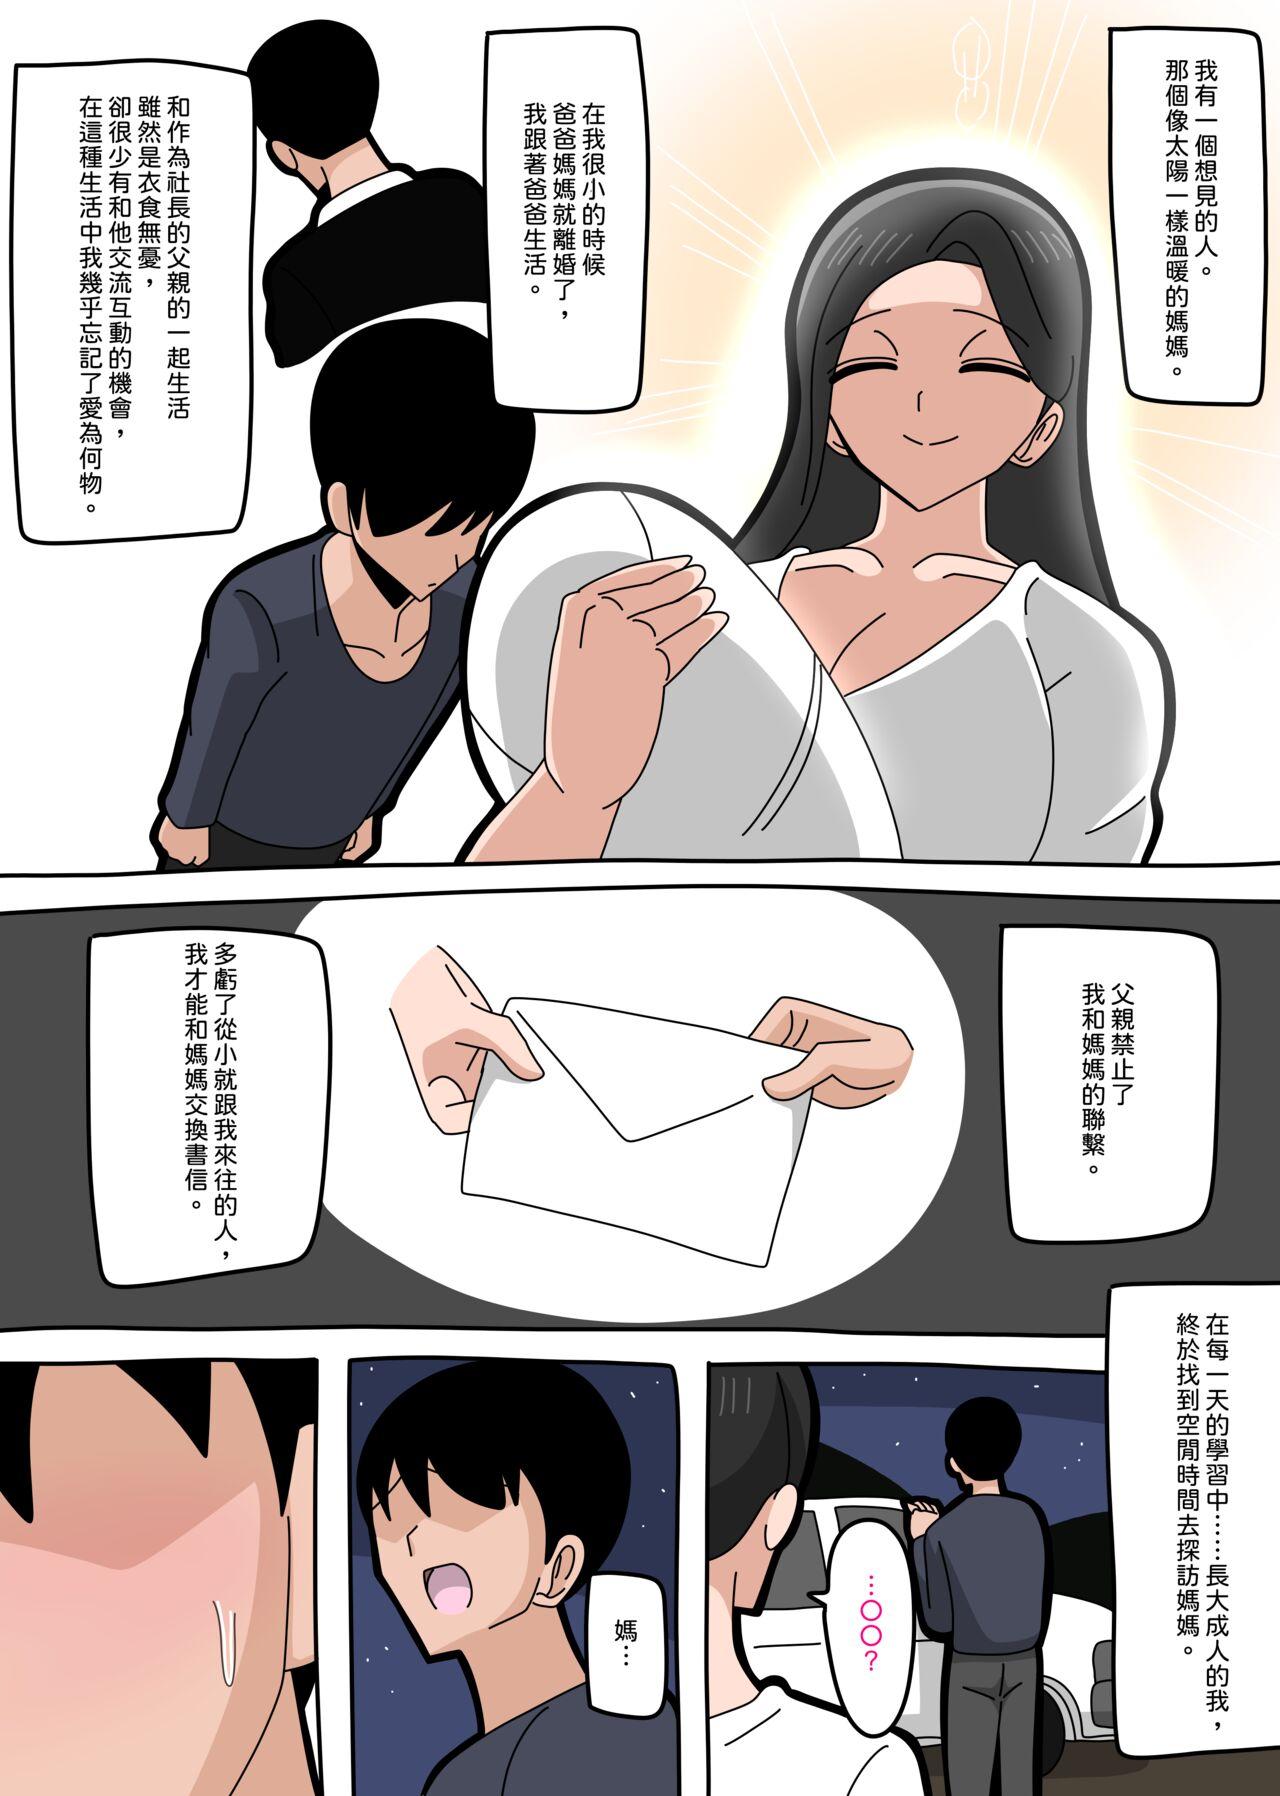 [18master] 2023-5-24 Meeting mom again after a long separation | 與媽媽重逢… [Chinese][興趣使然的個人機翻] 0